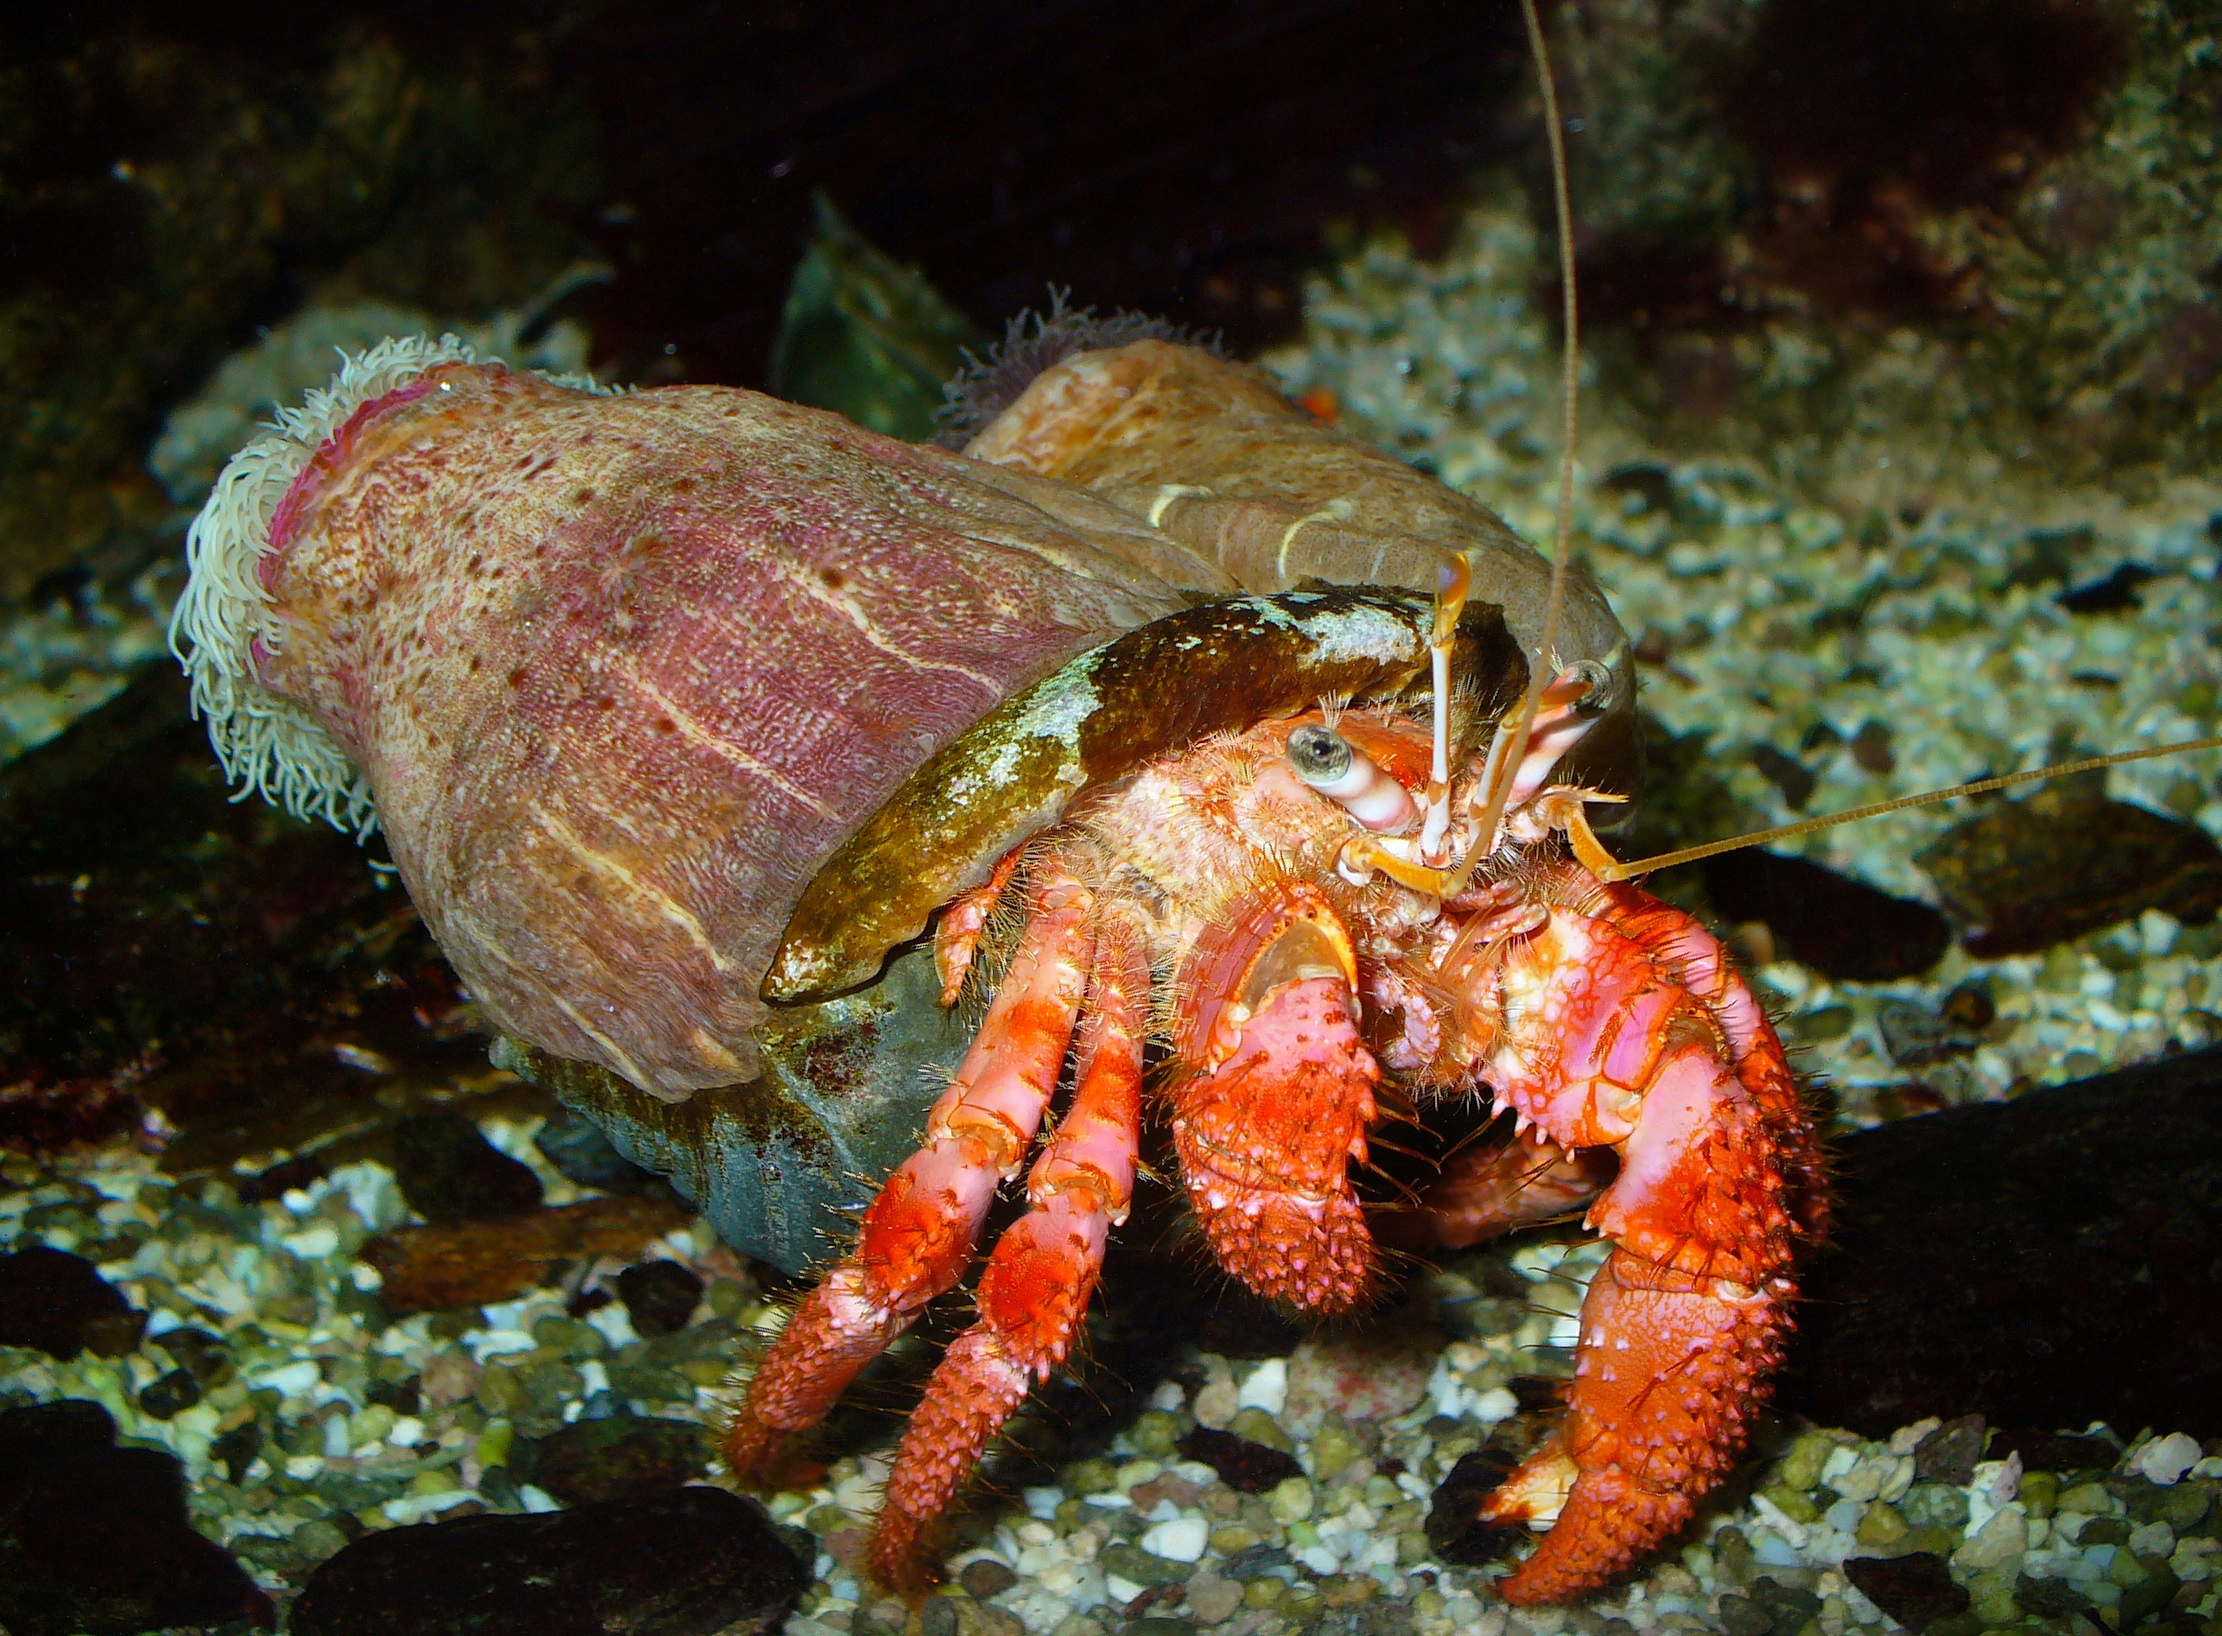 Are hermit crabs one or two claws?